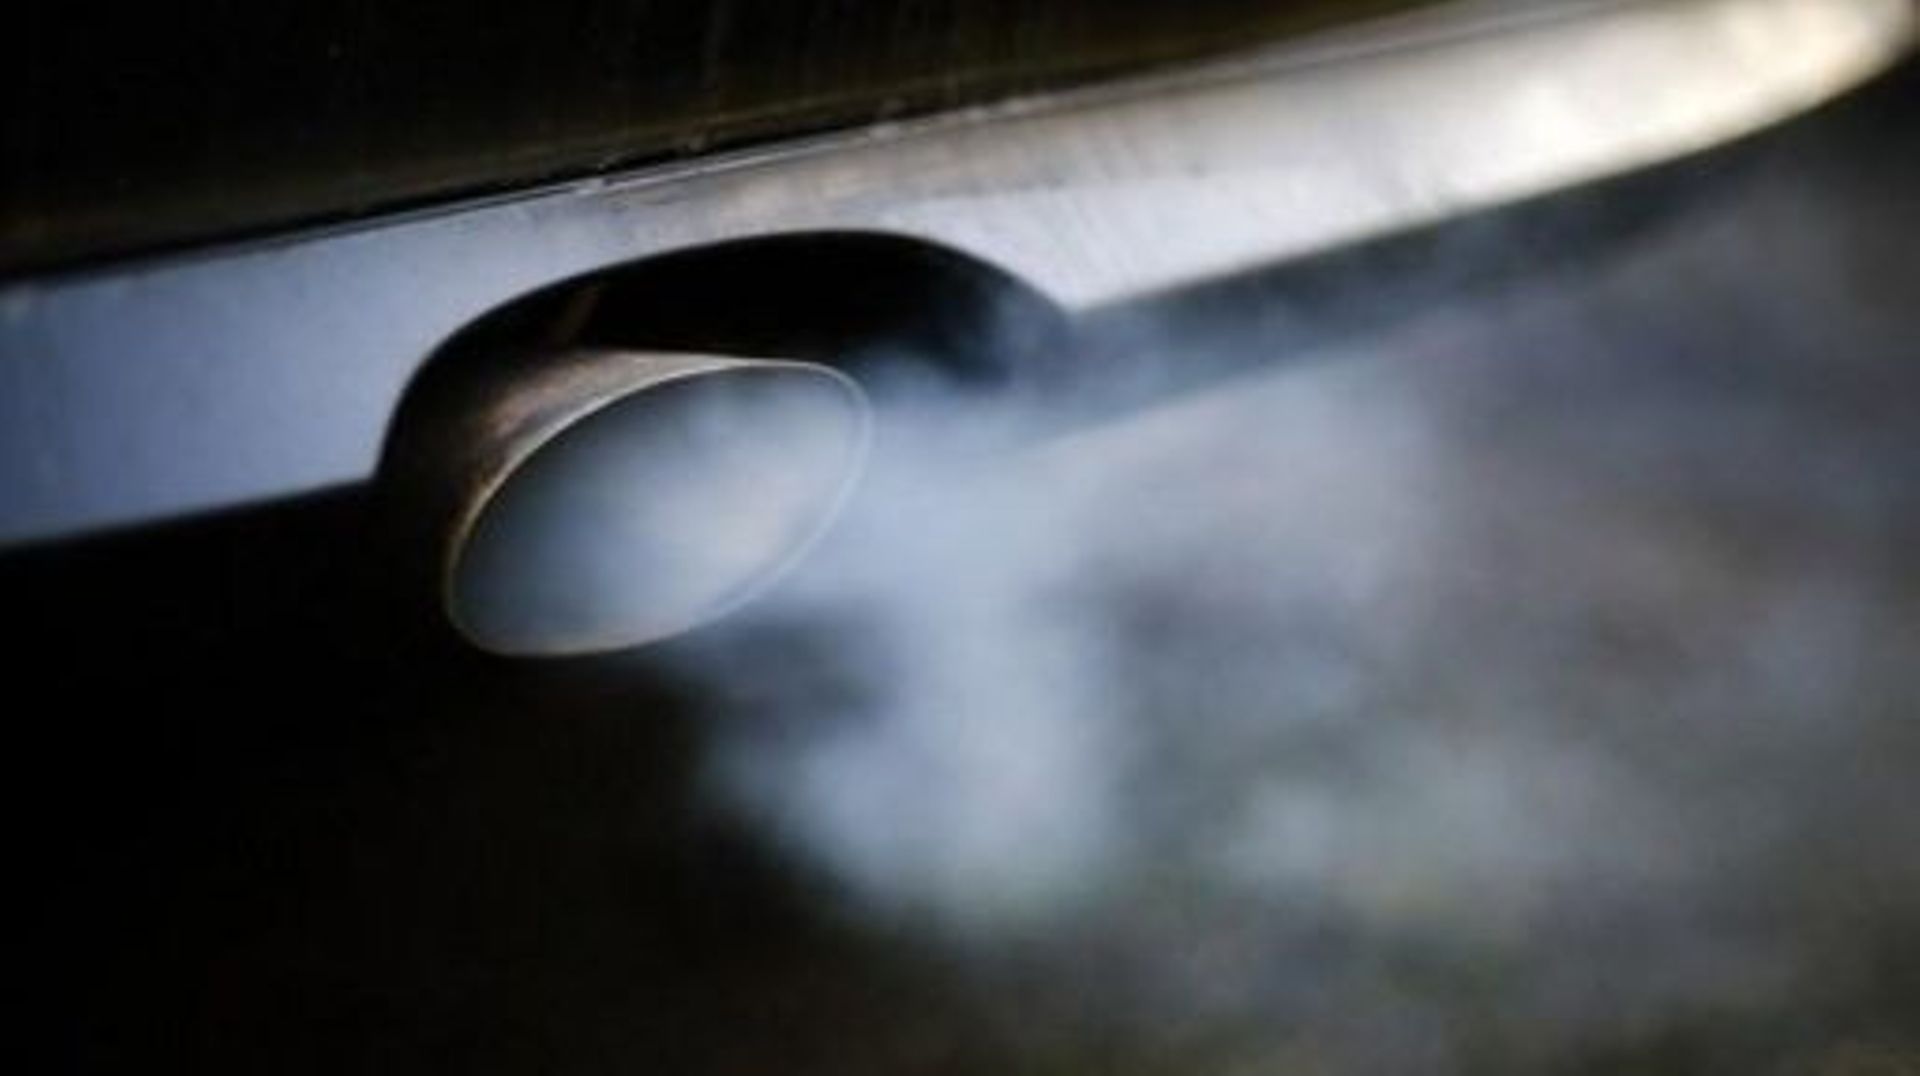 A picture taken on February 21, 2018 shows exhaust gases pourring out of from the exhaust pipe of a BMW diesel engine car at a garage in Wickede, eastern Germany. A court is to rule on February 21, 2018 on whether cities in Germany can ban certain diesel